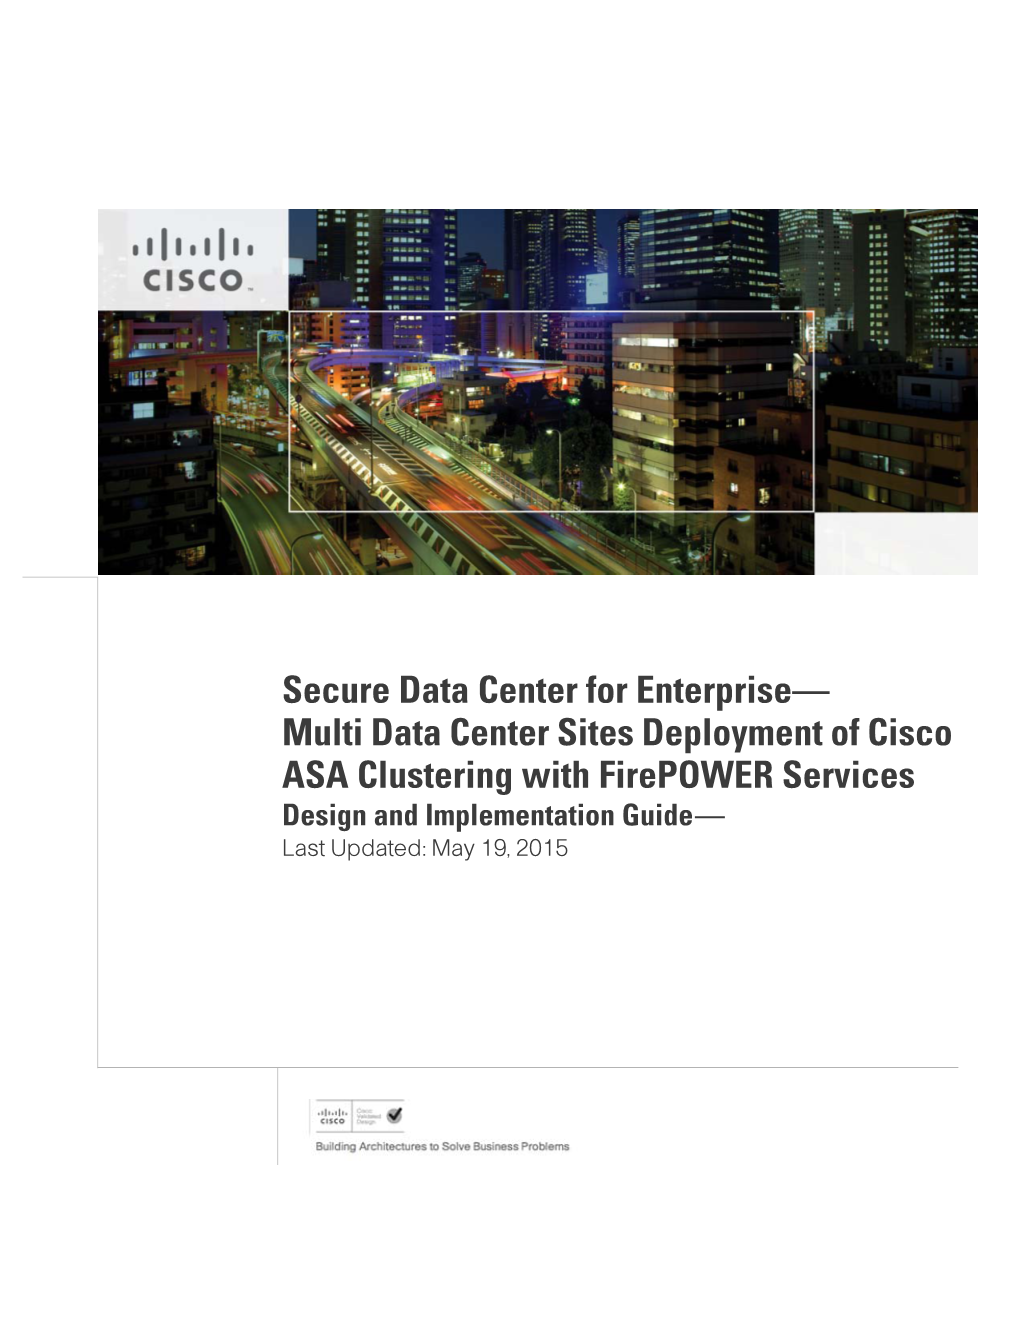 Multi Data Center Sites Deployment of Cisco ASA Clustering with Firepower Services Design and Implementation Guide— Last Updated: May 19, 2015 About the Authors